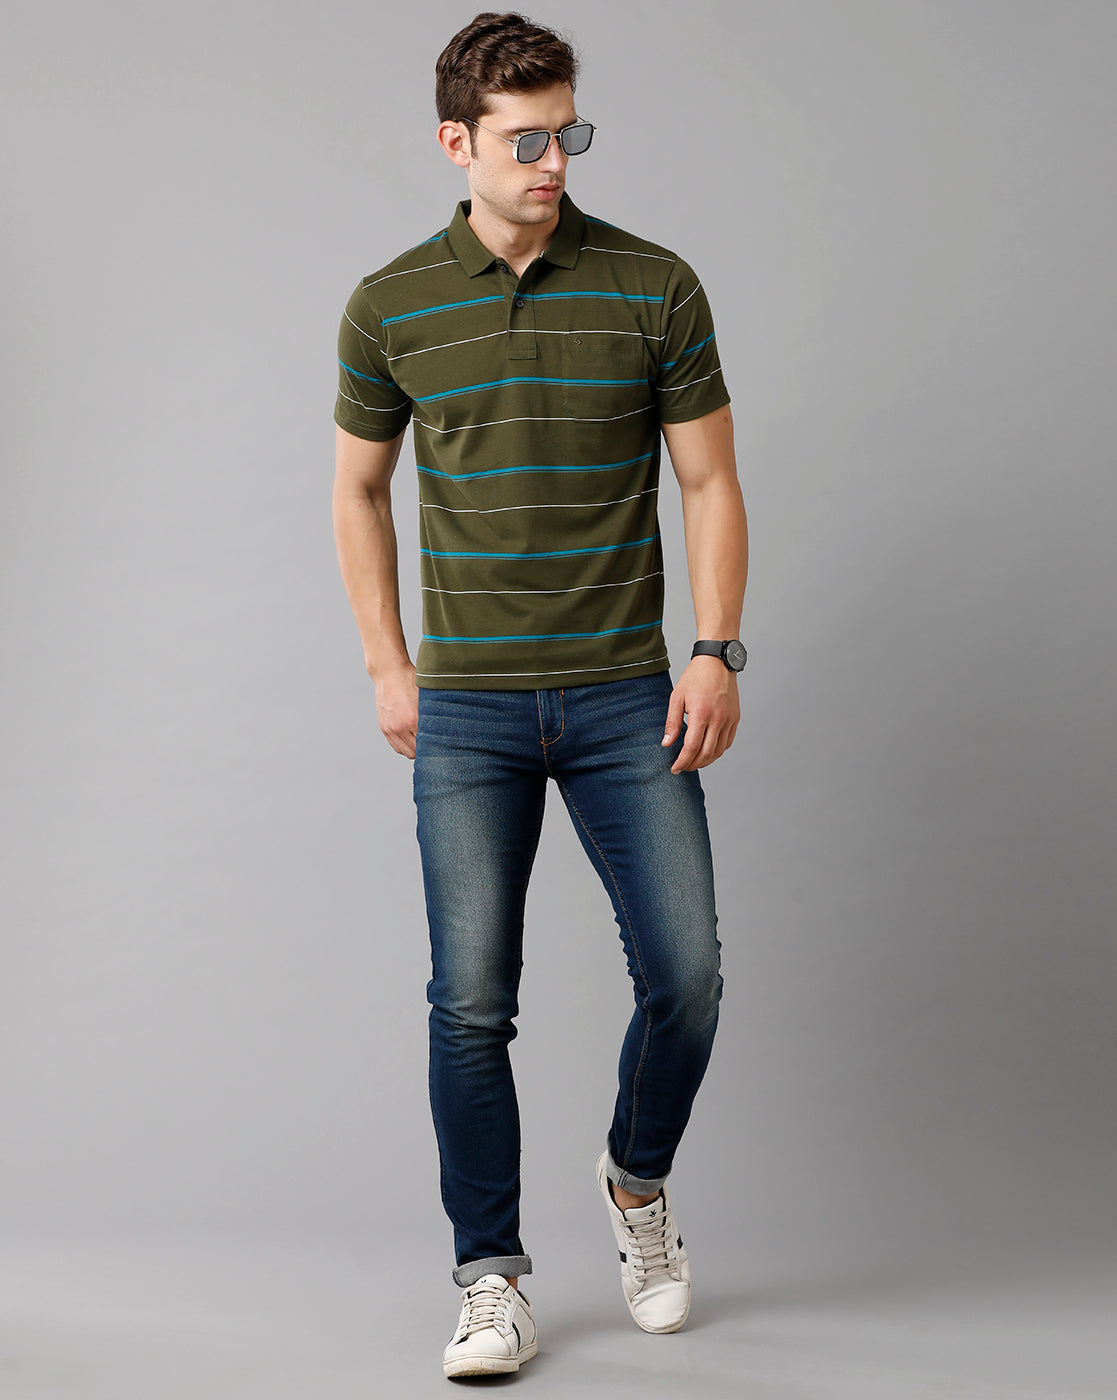 Classic Polo Mens Cotton Blend Striped Half Sleeve Authentic Fit Polo Neck Olive Color T-Shirt | Avon 500 B